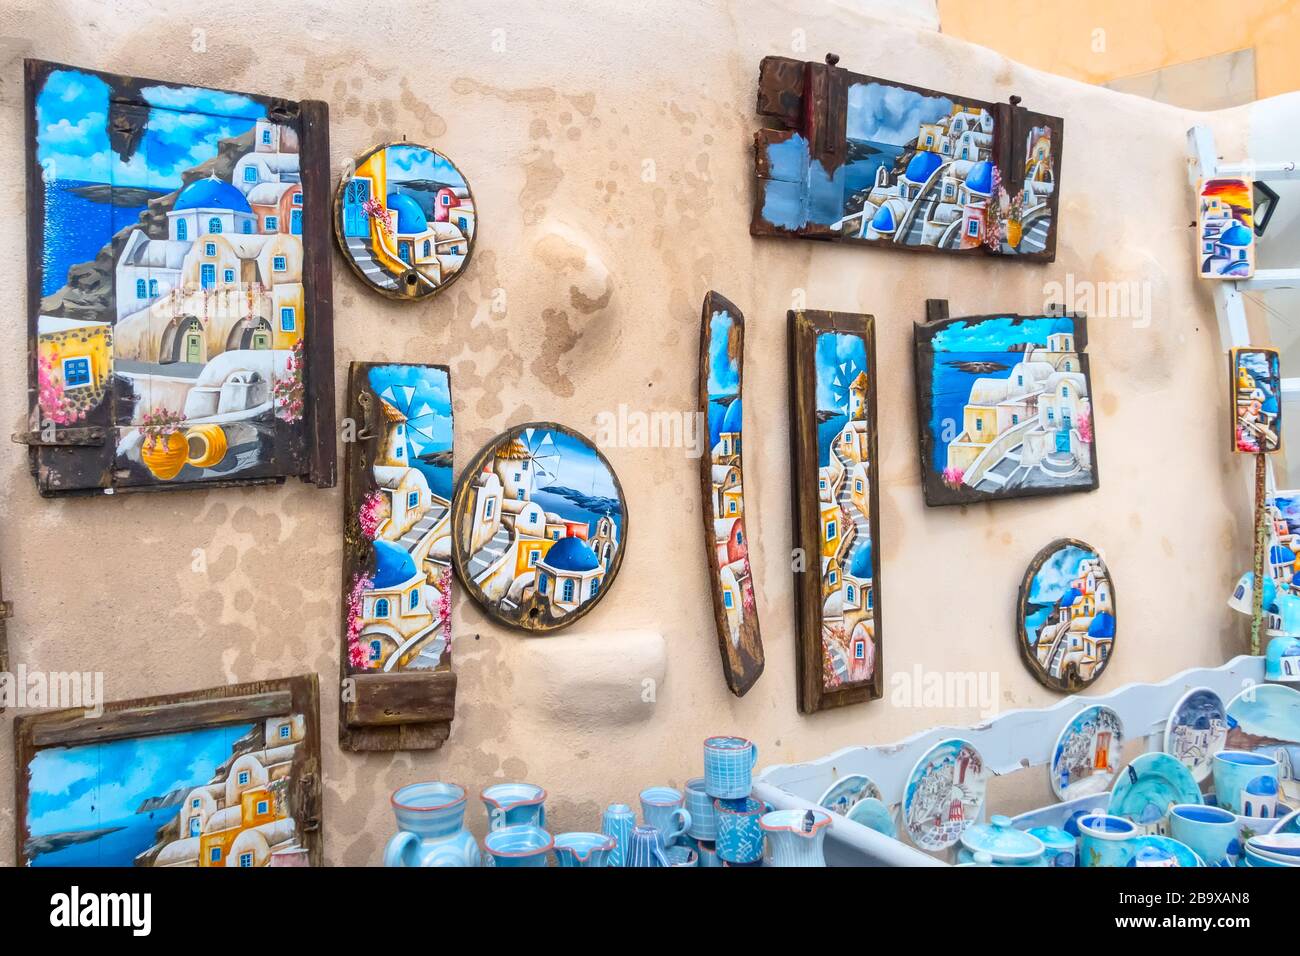 Santorini, Greece - April 26, 2019: Oia village street wall with traditional pictures in gift souvenir shop Stock Photo